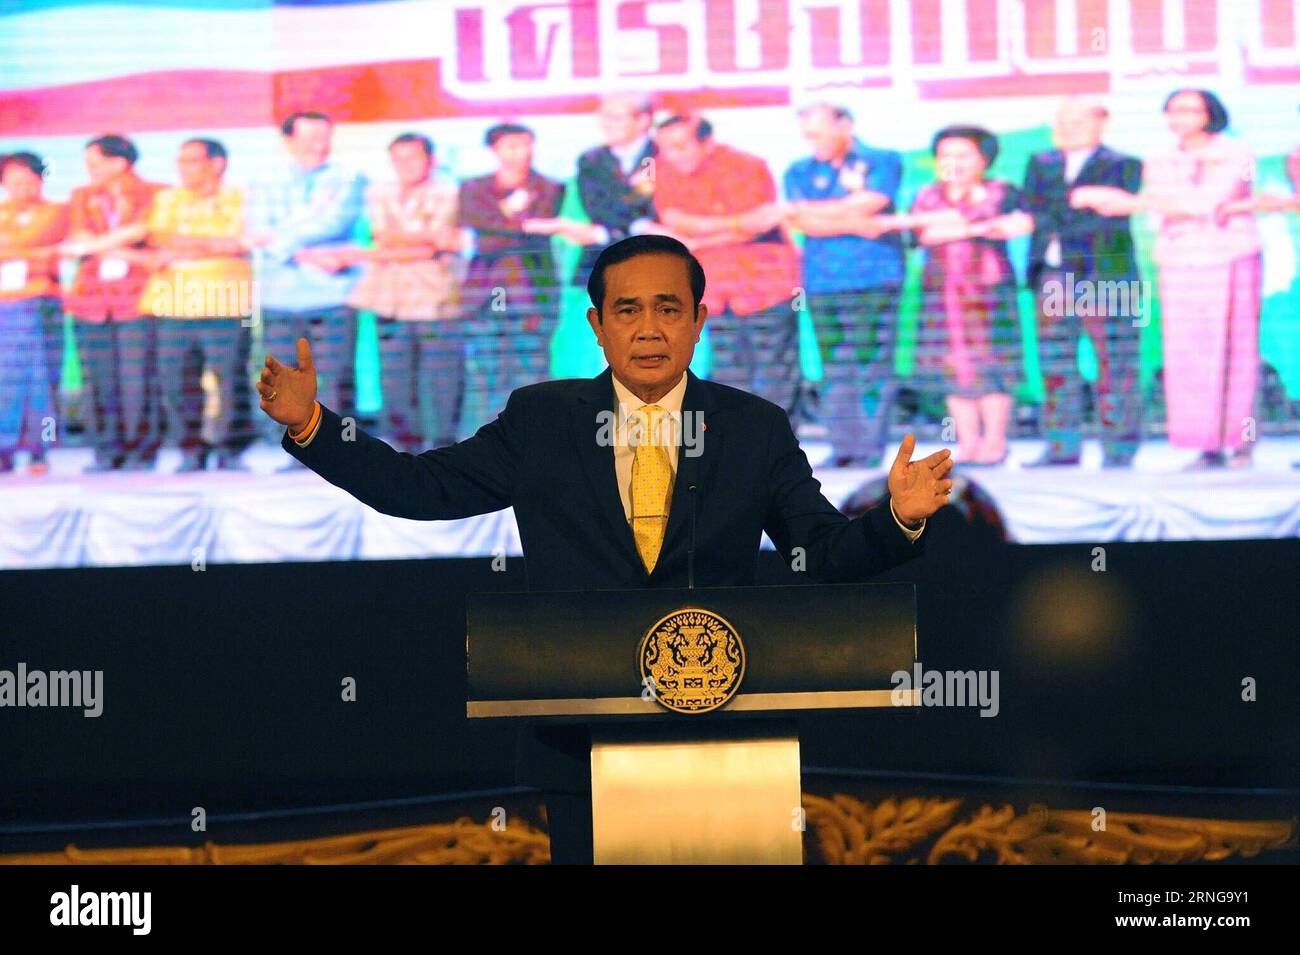 (160915) -- BANGKOK, Sept. 15, 2016 -- Thai Prime Minister Prayut Chan-o-cha speaks during a press conference on the performances of the government during the last two years, at the Thai Government House in Bangkok, capital of Thailand, on Sept. 15, 2016. Thailand could potentially upgrade itself from the long-standing status of a Third World developing country to a First World developed country, Thai Prime Minister Prayut Chan-o-cha said on Thursday. ) (syq) THAILAND-BANGKOK-PM-PRESS CONFERENCE RachenxSageamsak PUBLICATIONxNOTxINxCHN   160915 Bangkok Sept 15 2016 Thai Prime Ministers Prayut C Stock Photo